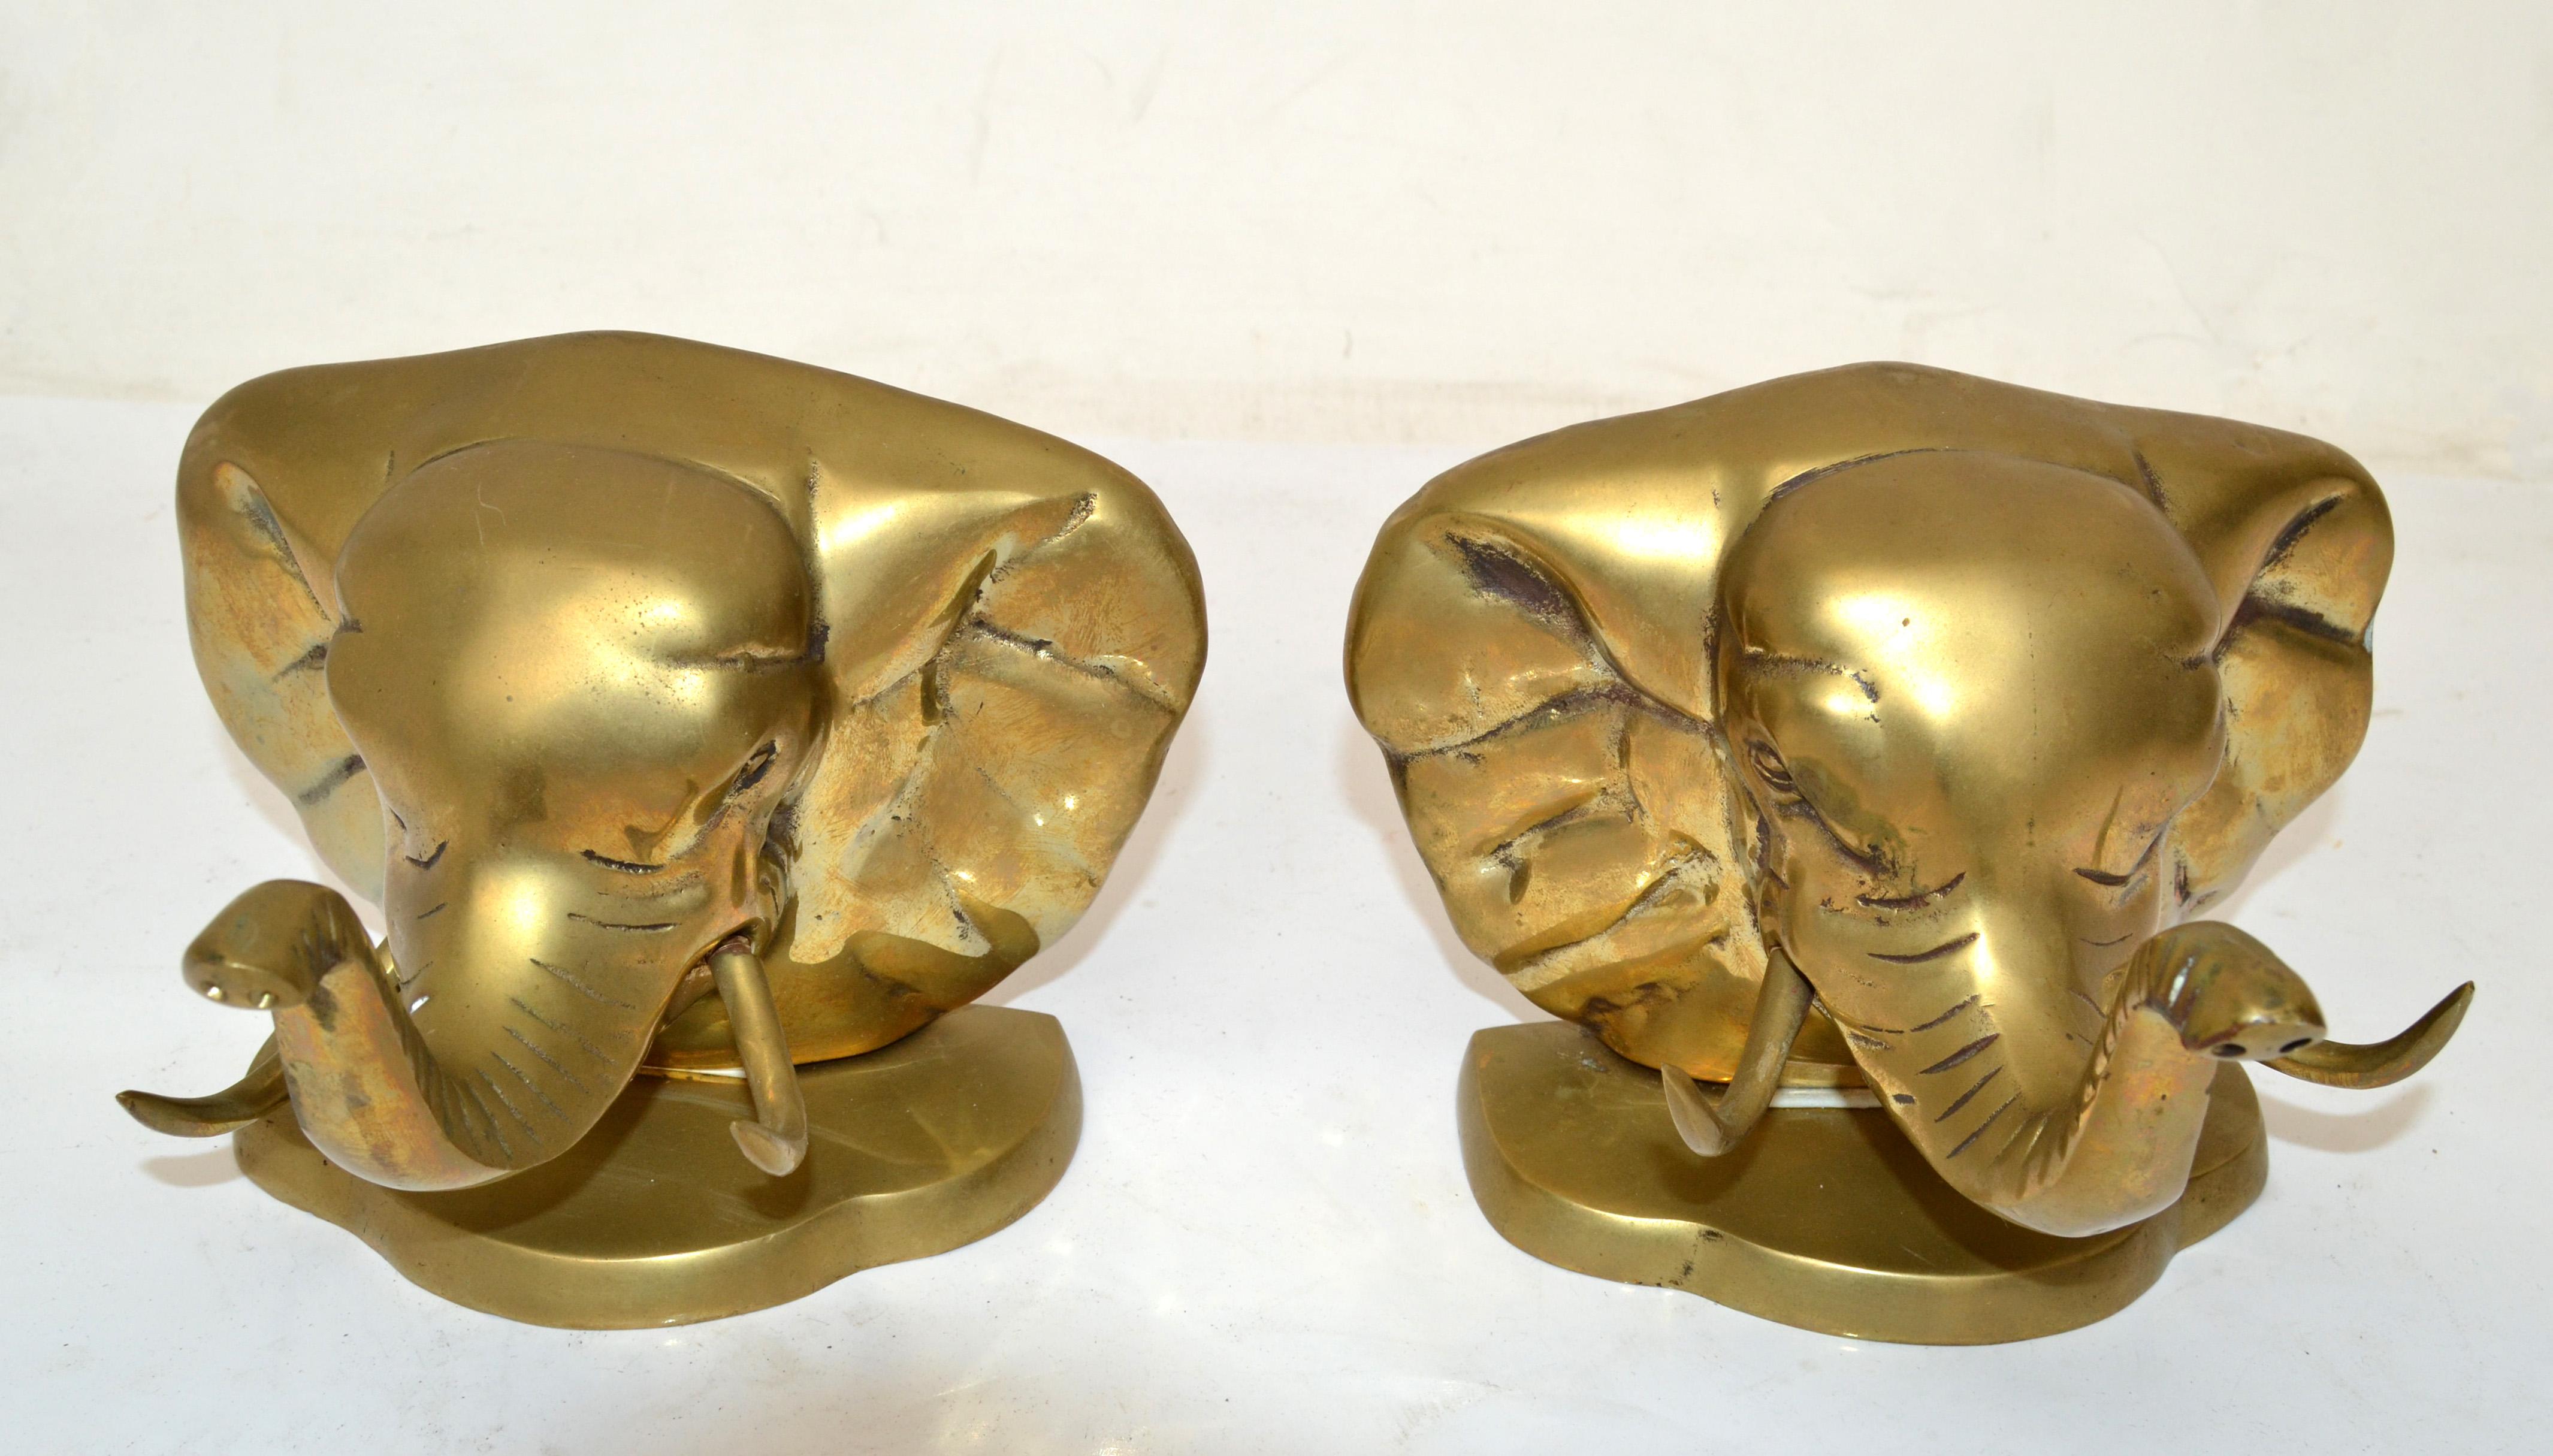 Mid-Century Modern pair of elephant head bookends made out of solid brass.
The set has the original condition, and it is not polished, it shows patina.
Great animal sculptures bookends.